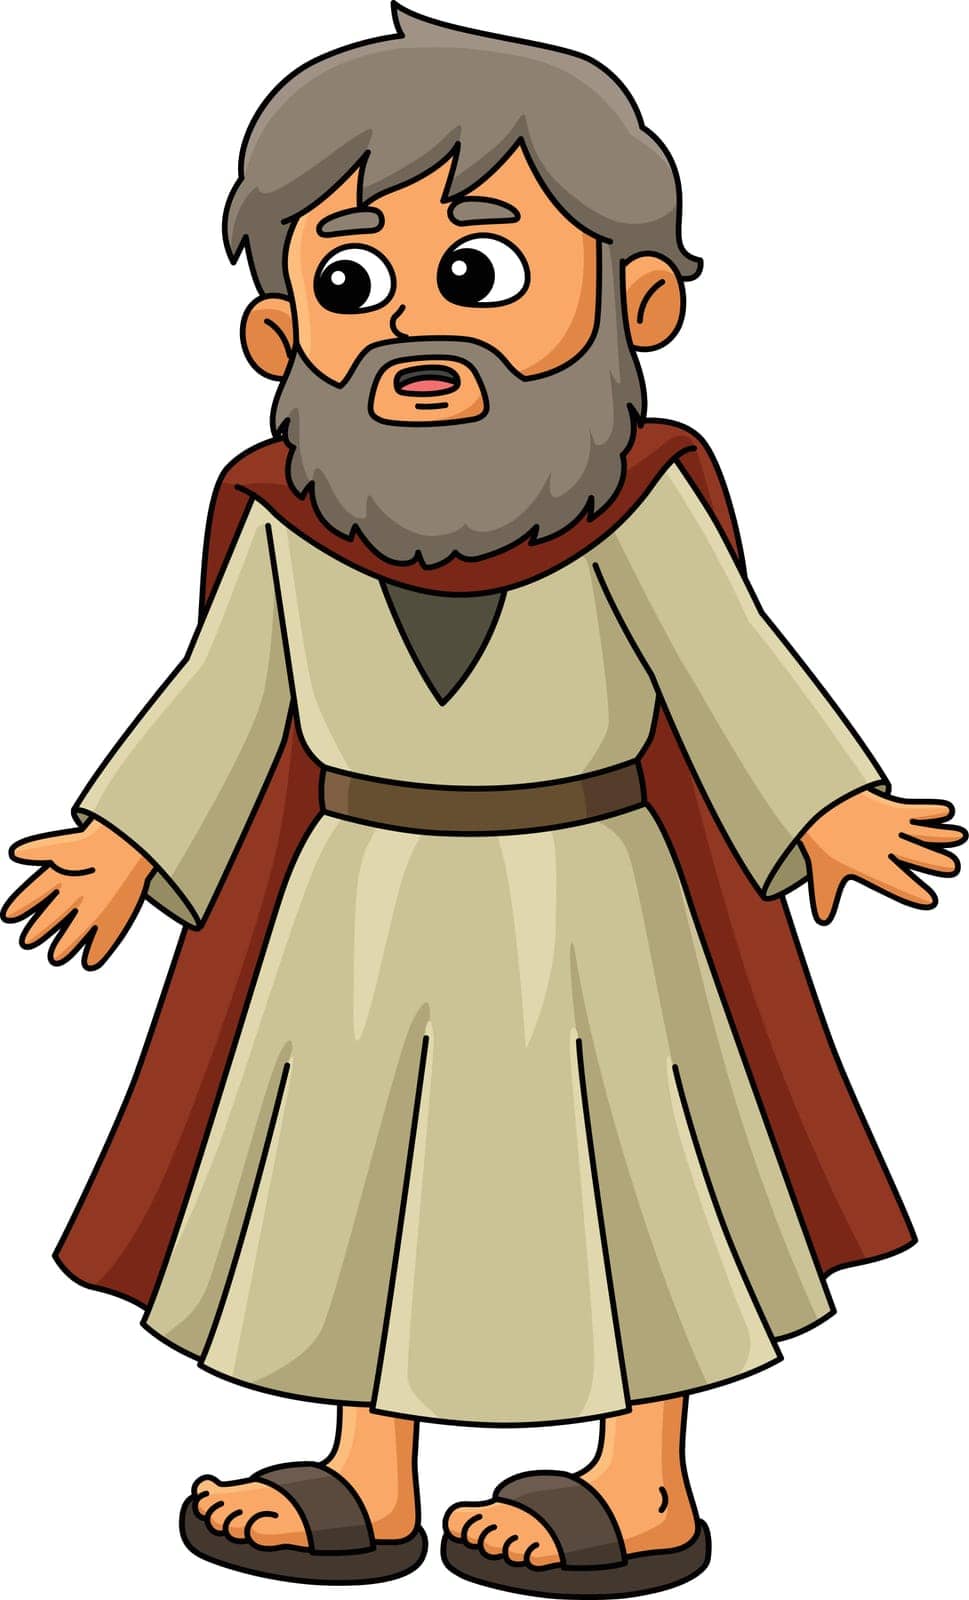 This cartoon clipart shows a Moses illustration.